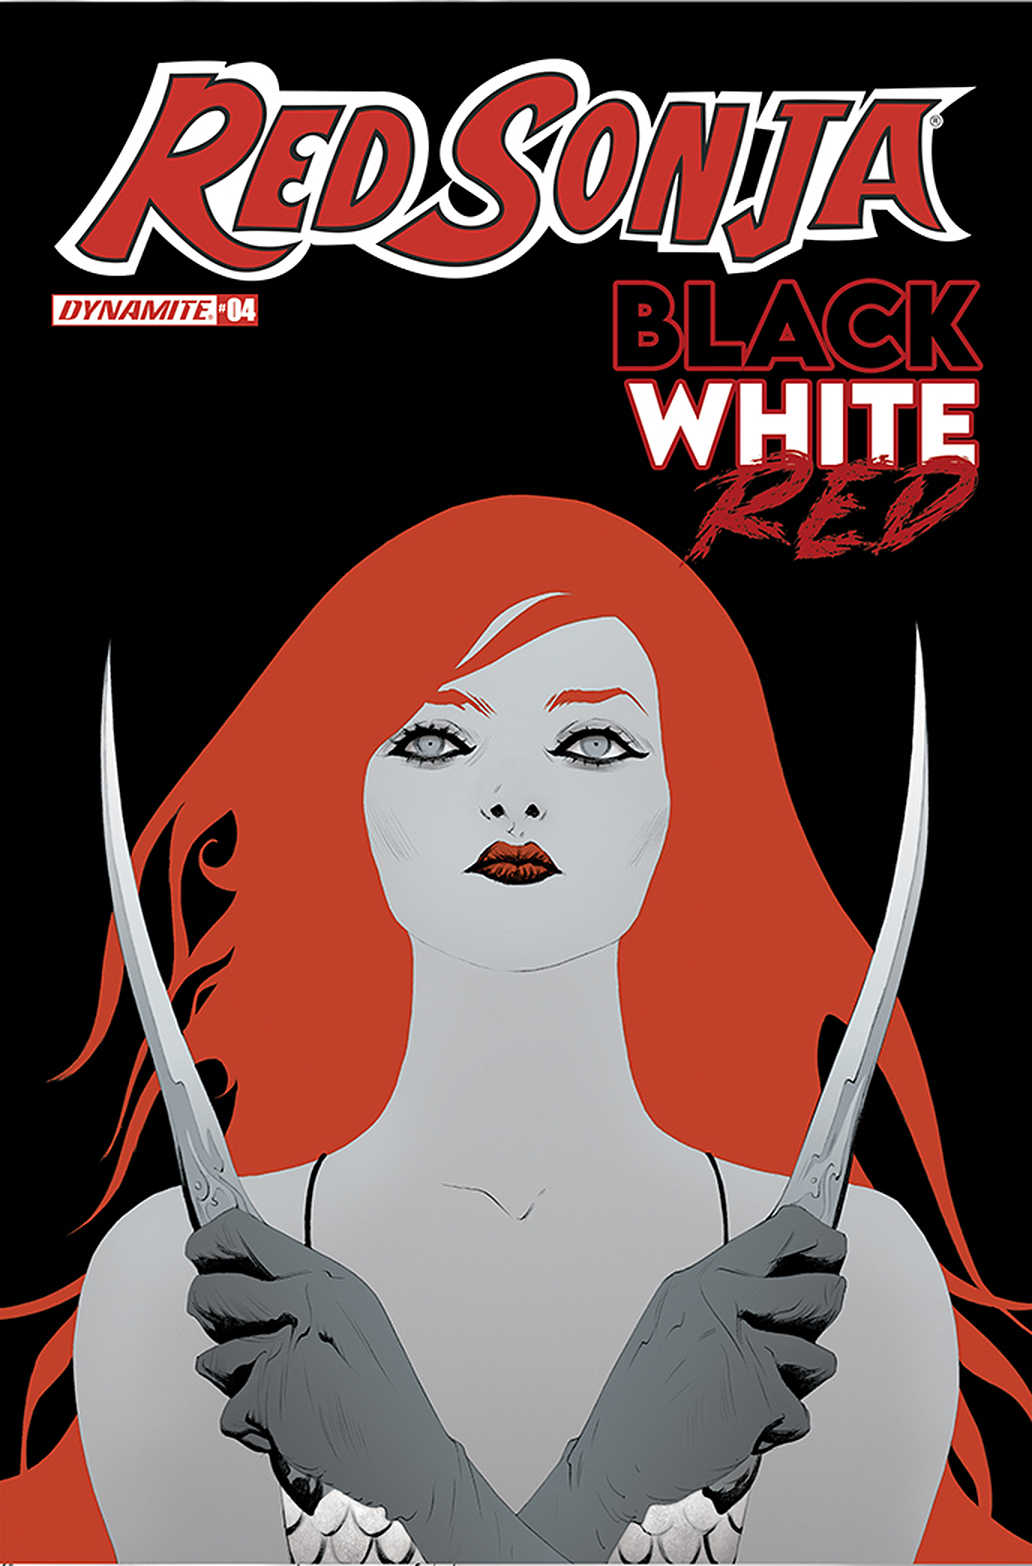 Red Sonja Black White Red #4 Cover C Lee